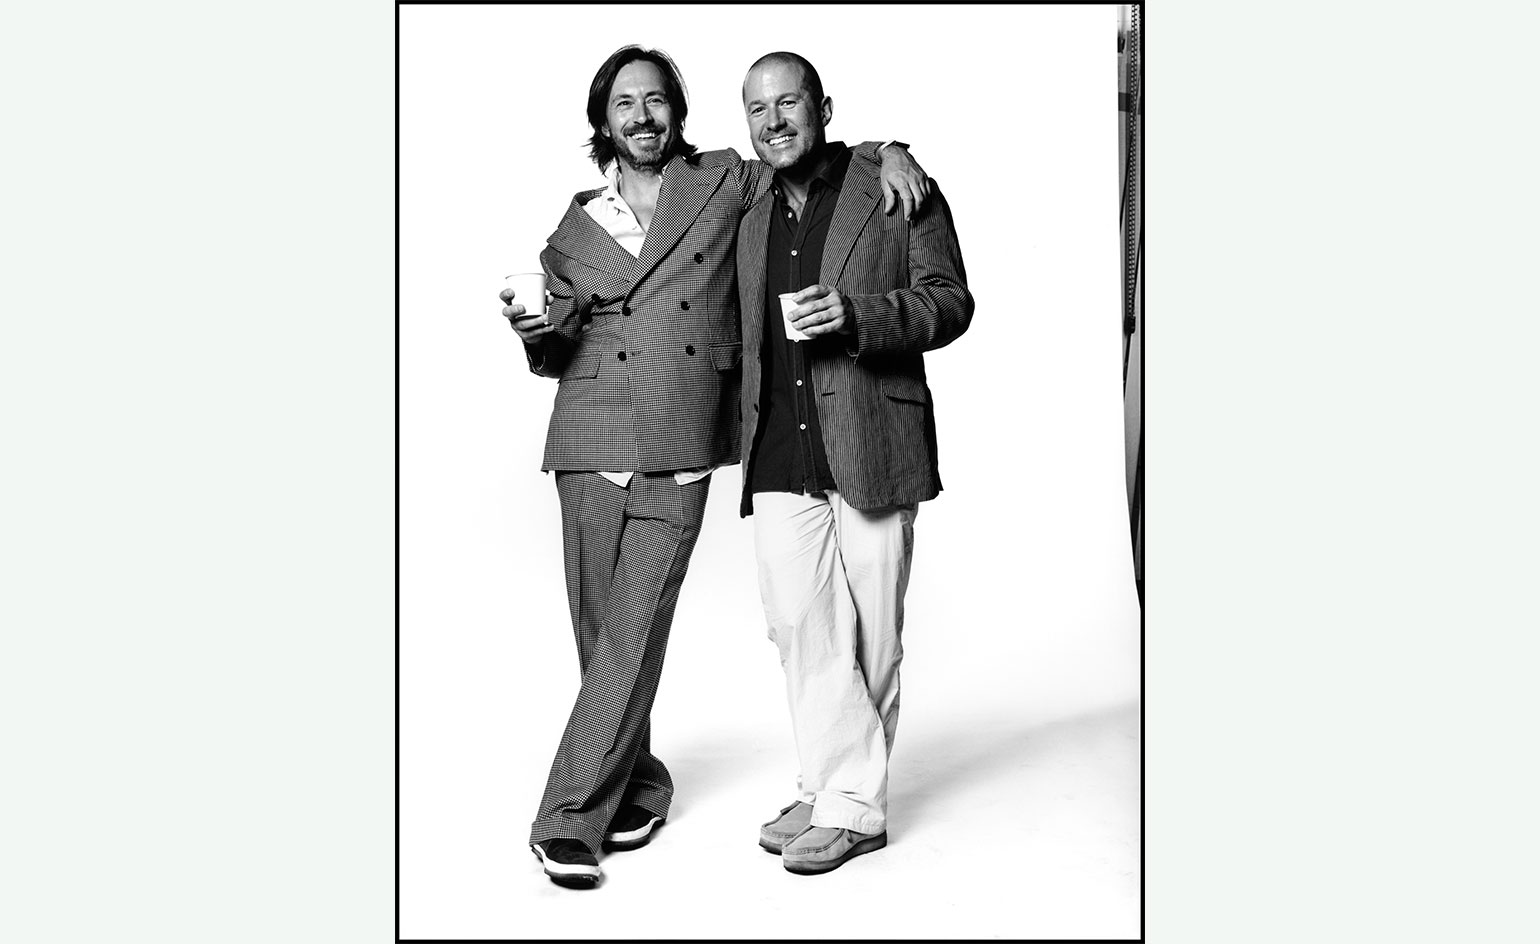 Marc Newson to Join Apple, Jony Ive's Design Team (Exclusive